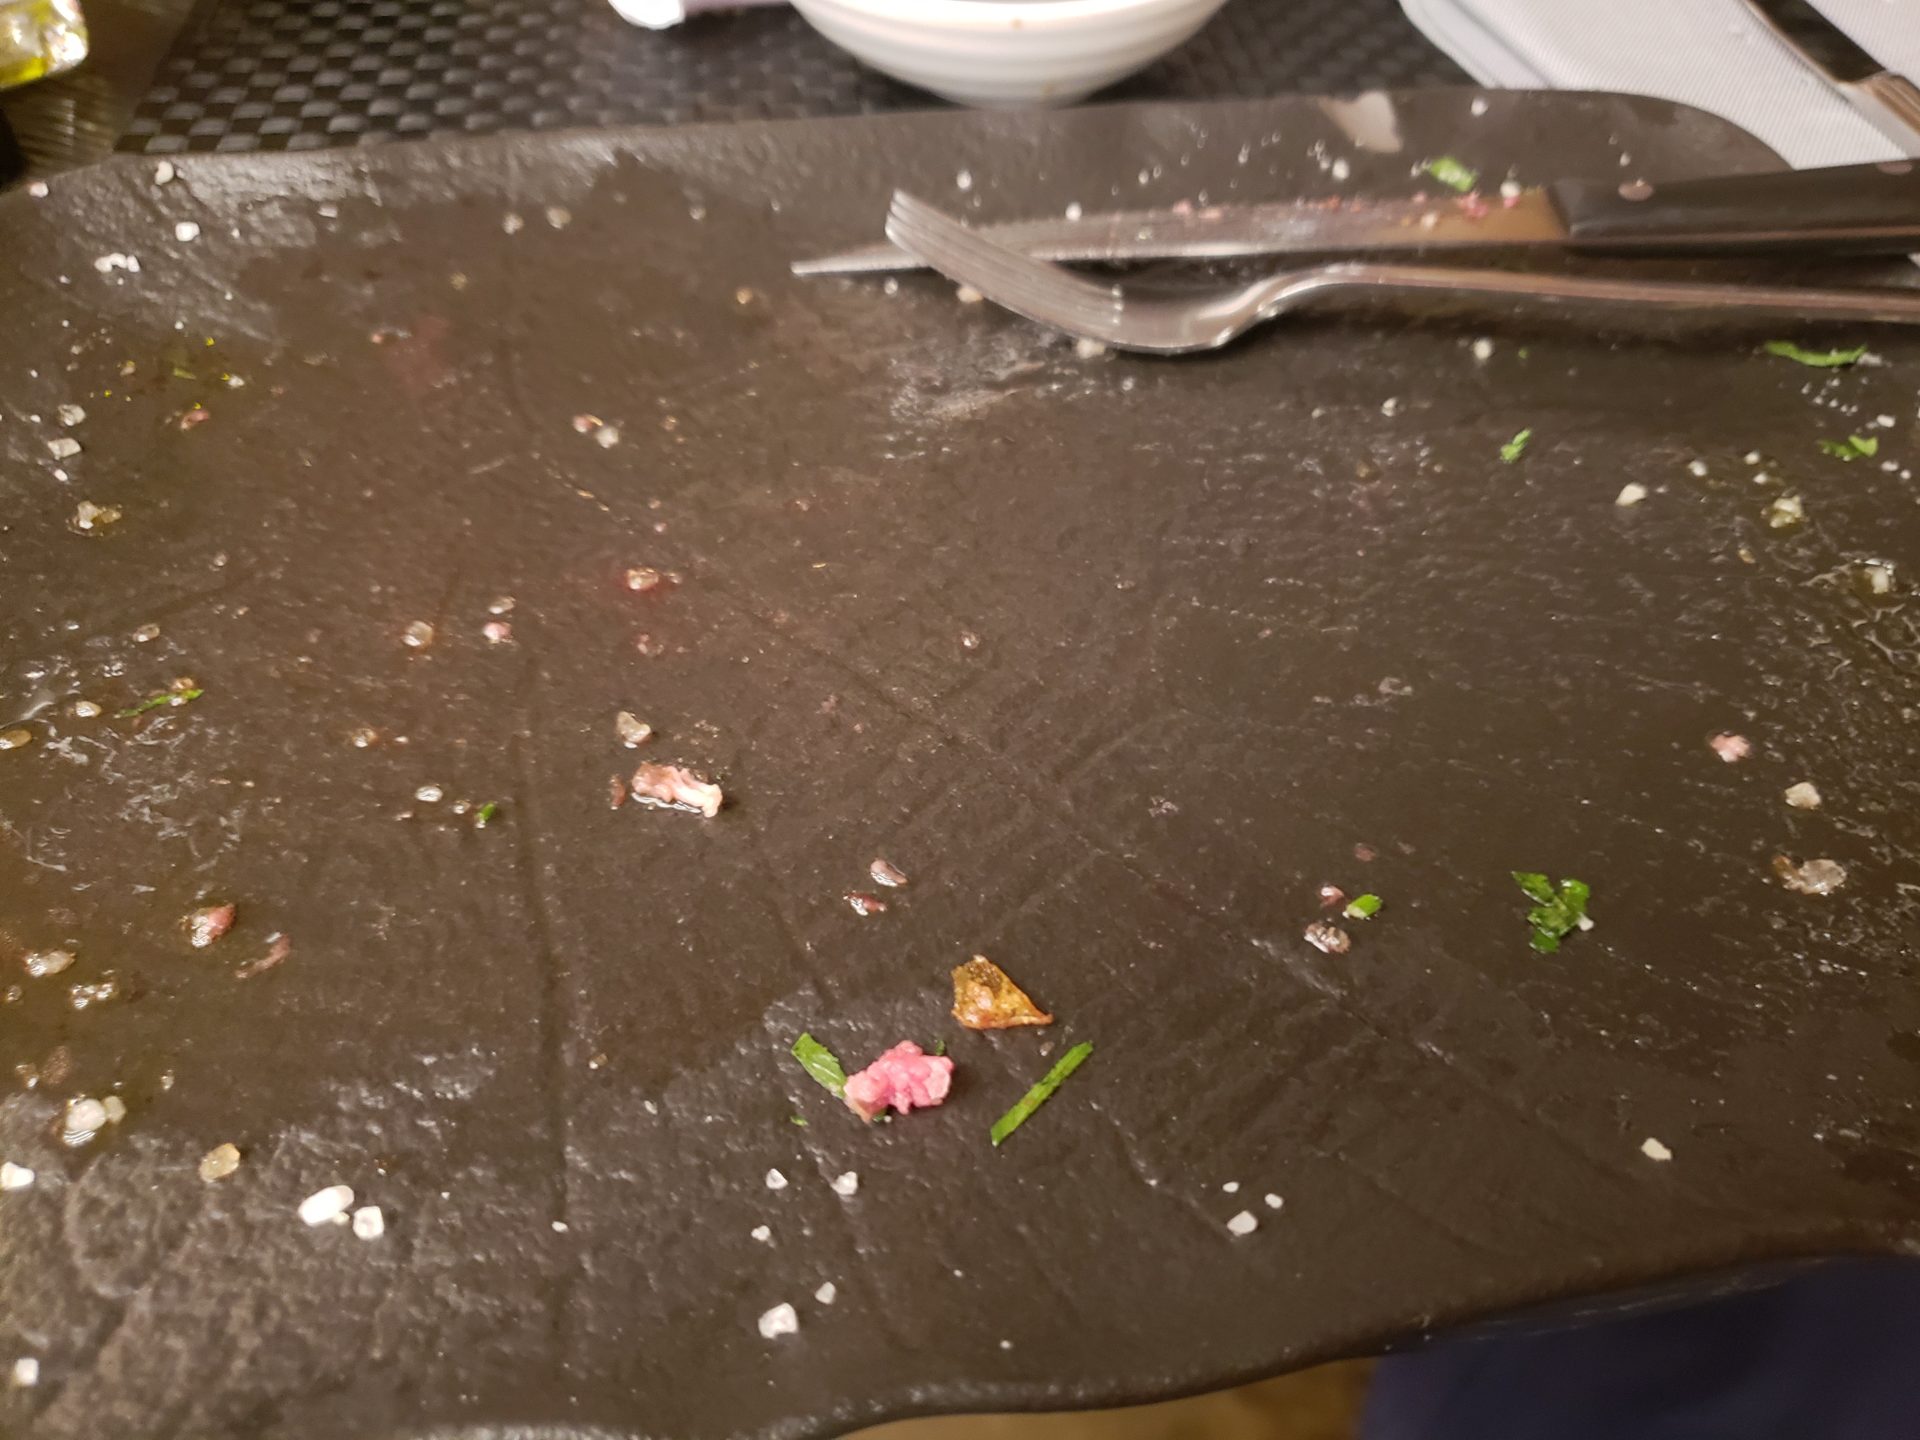 a dirty plate with food crumbs and a fork